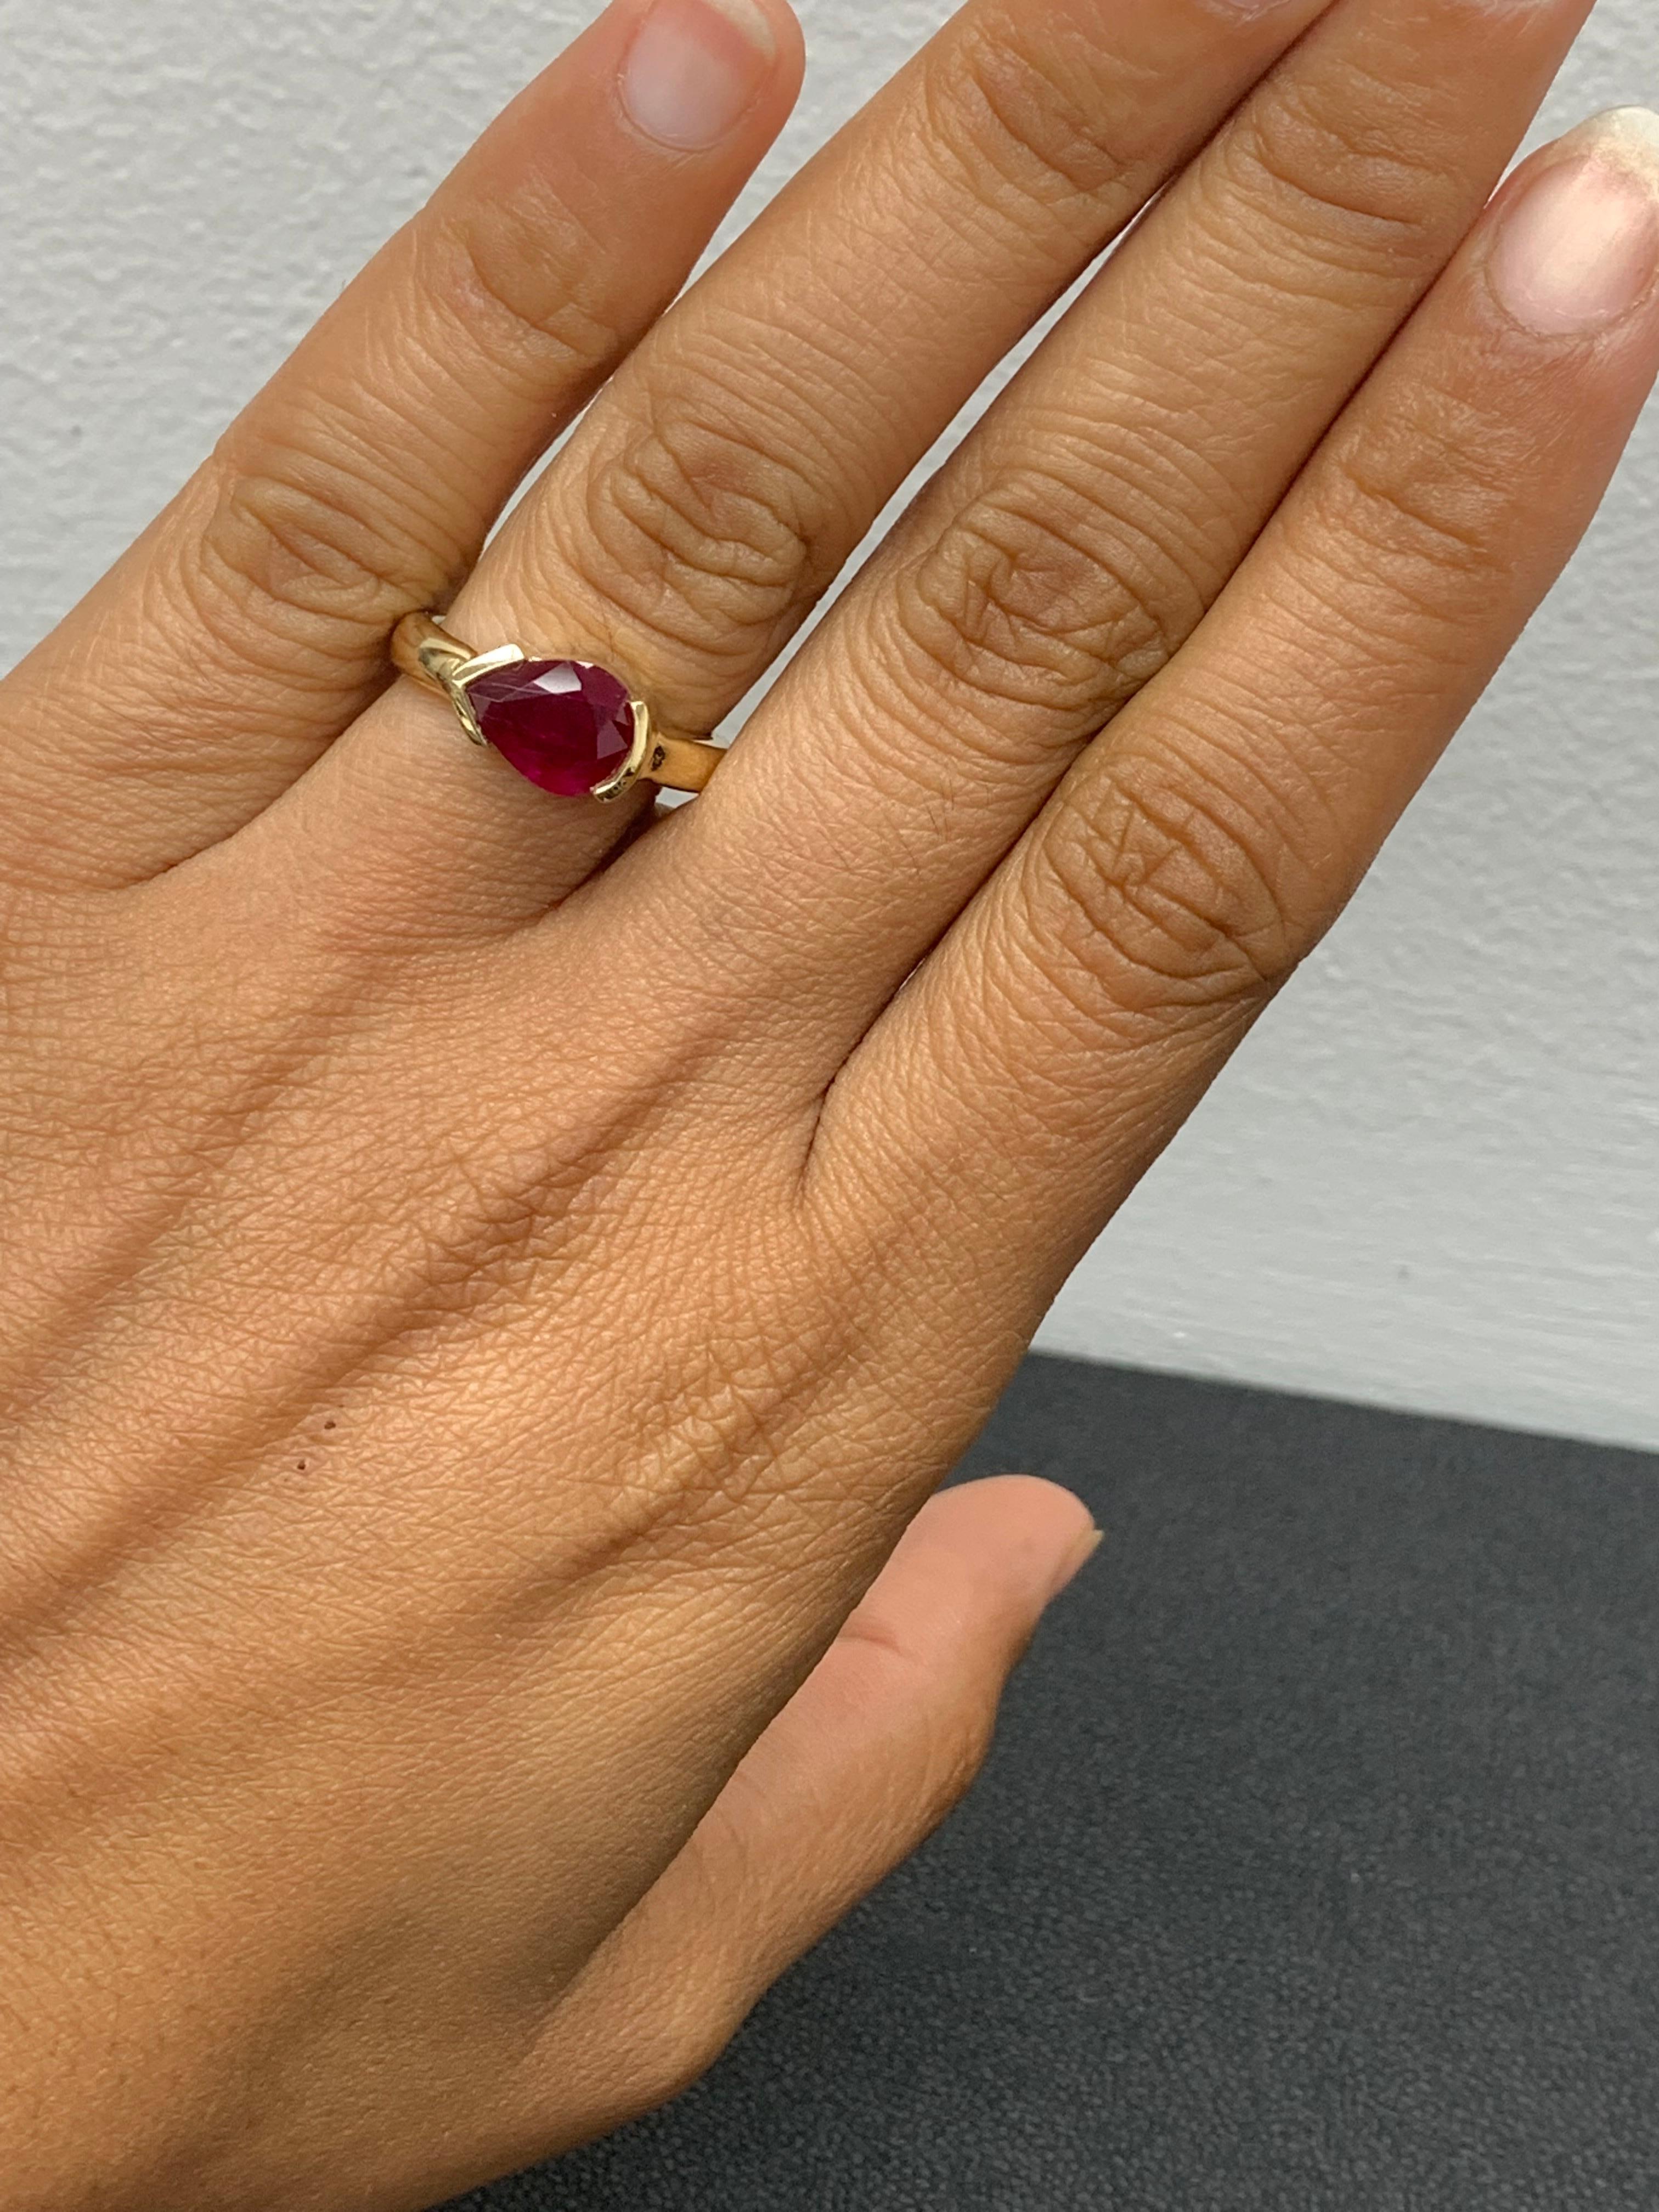 A stunning well-crafted engagement ring showcasing a 1.85-carat pear shape Ruby. Set in a polished 14K Yellow Gold mounting. Handcrafted in our New York City workshop. 

Style is available in different price ranges. Prices are based on your